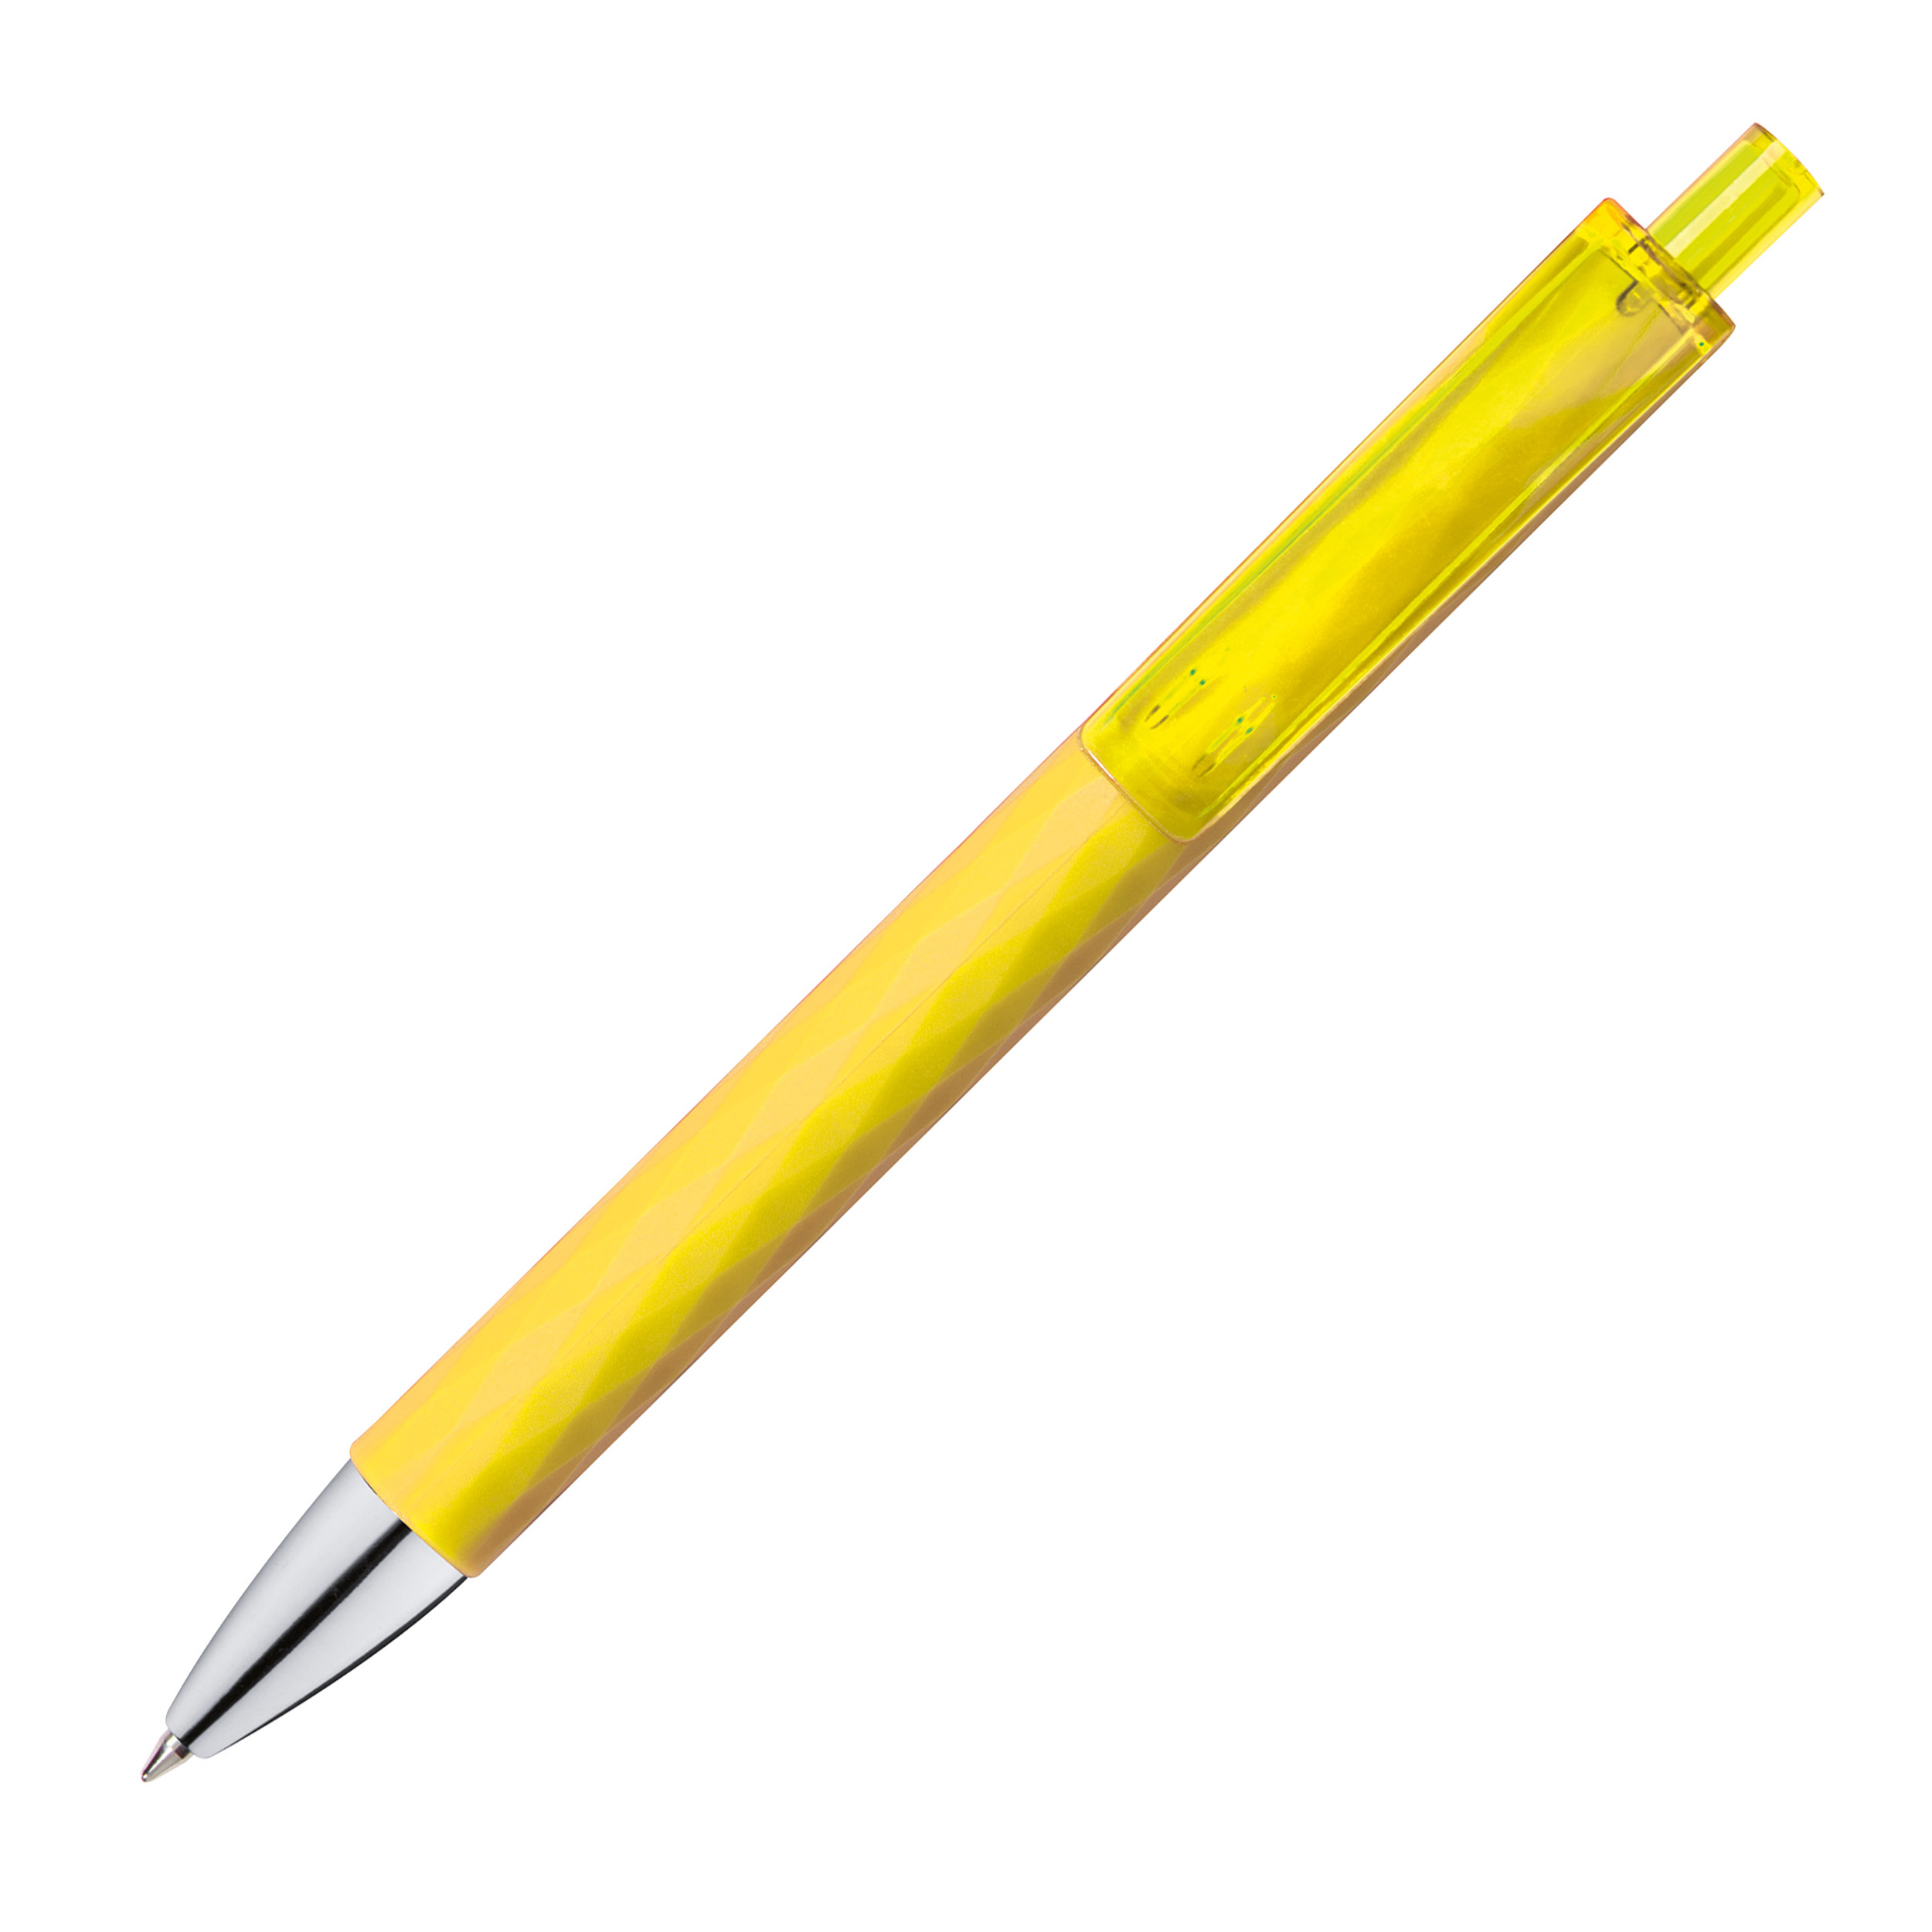 Plastic ball pen with patterns